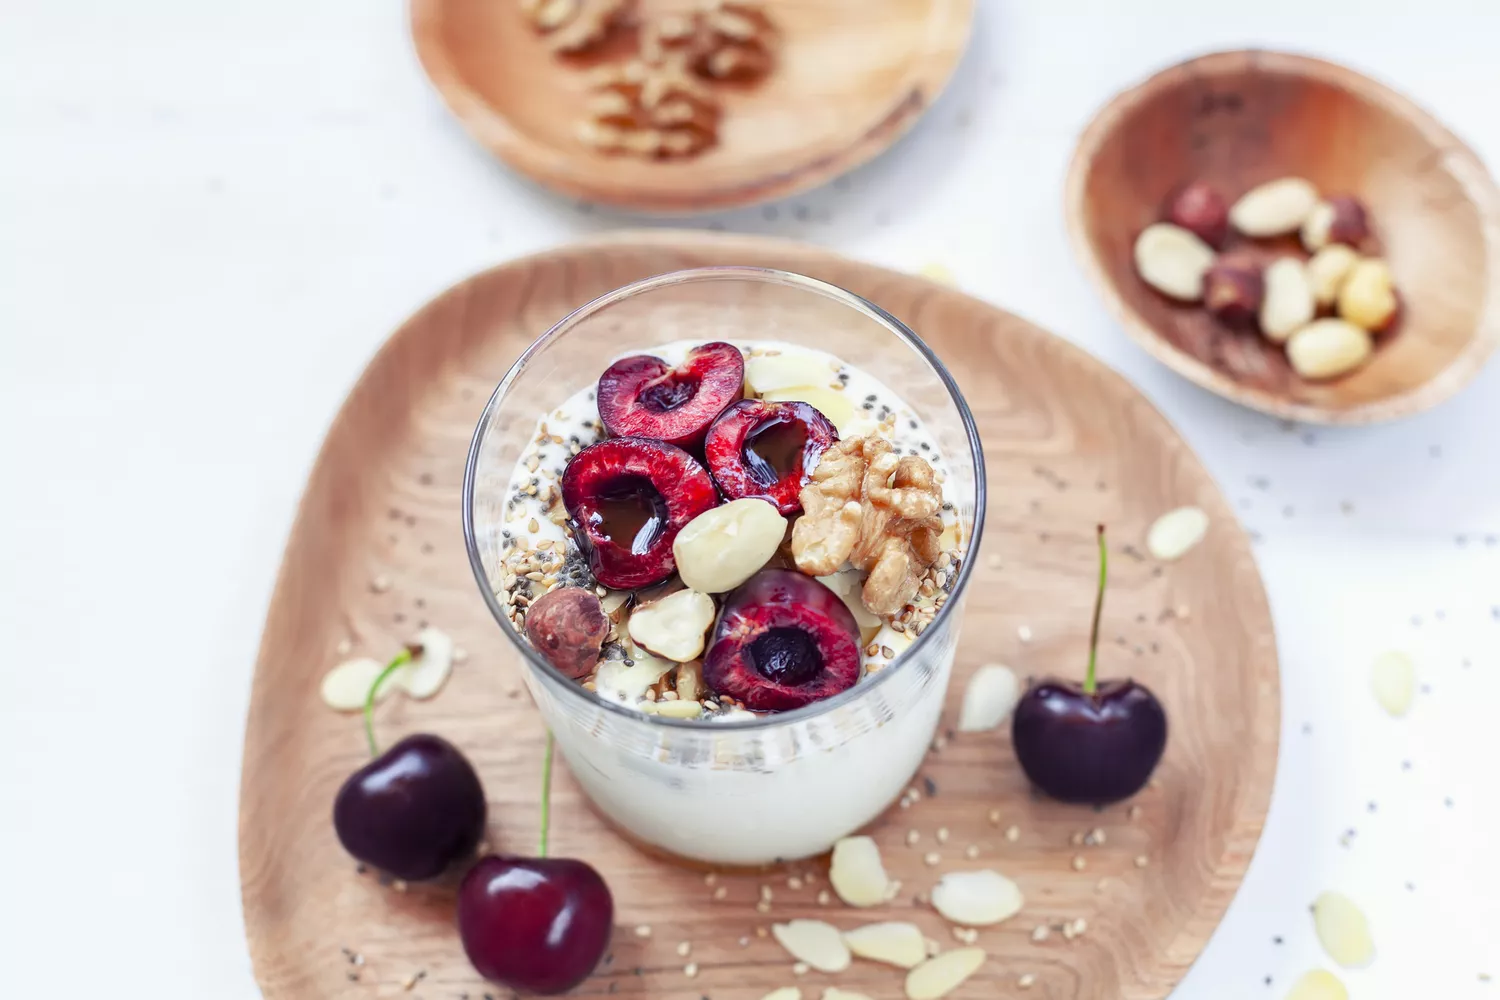 Glass of greek yogurt topped with cherries and nuts. Sitting atop a wooden plate with cherries and nuts on the side.